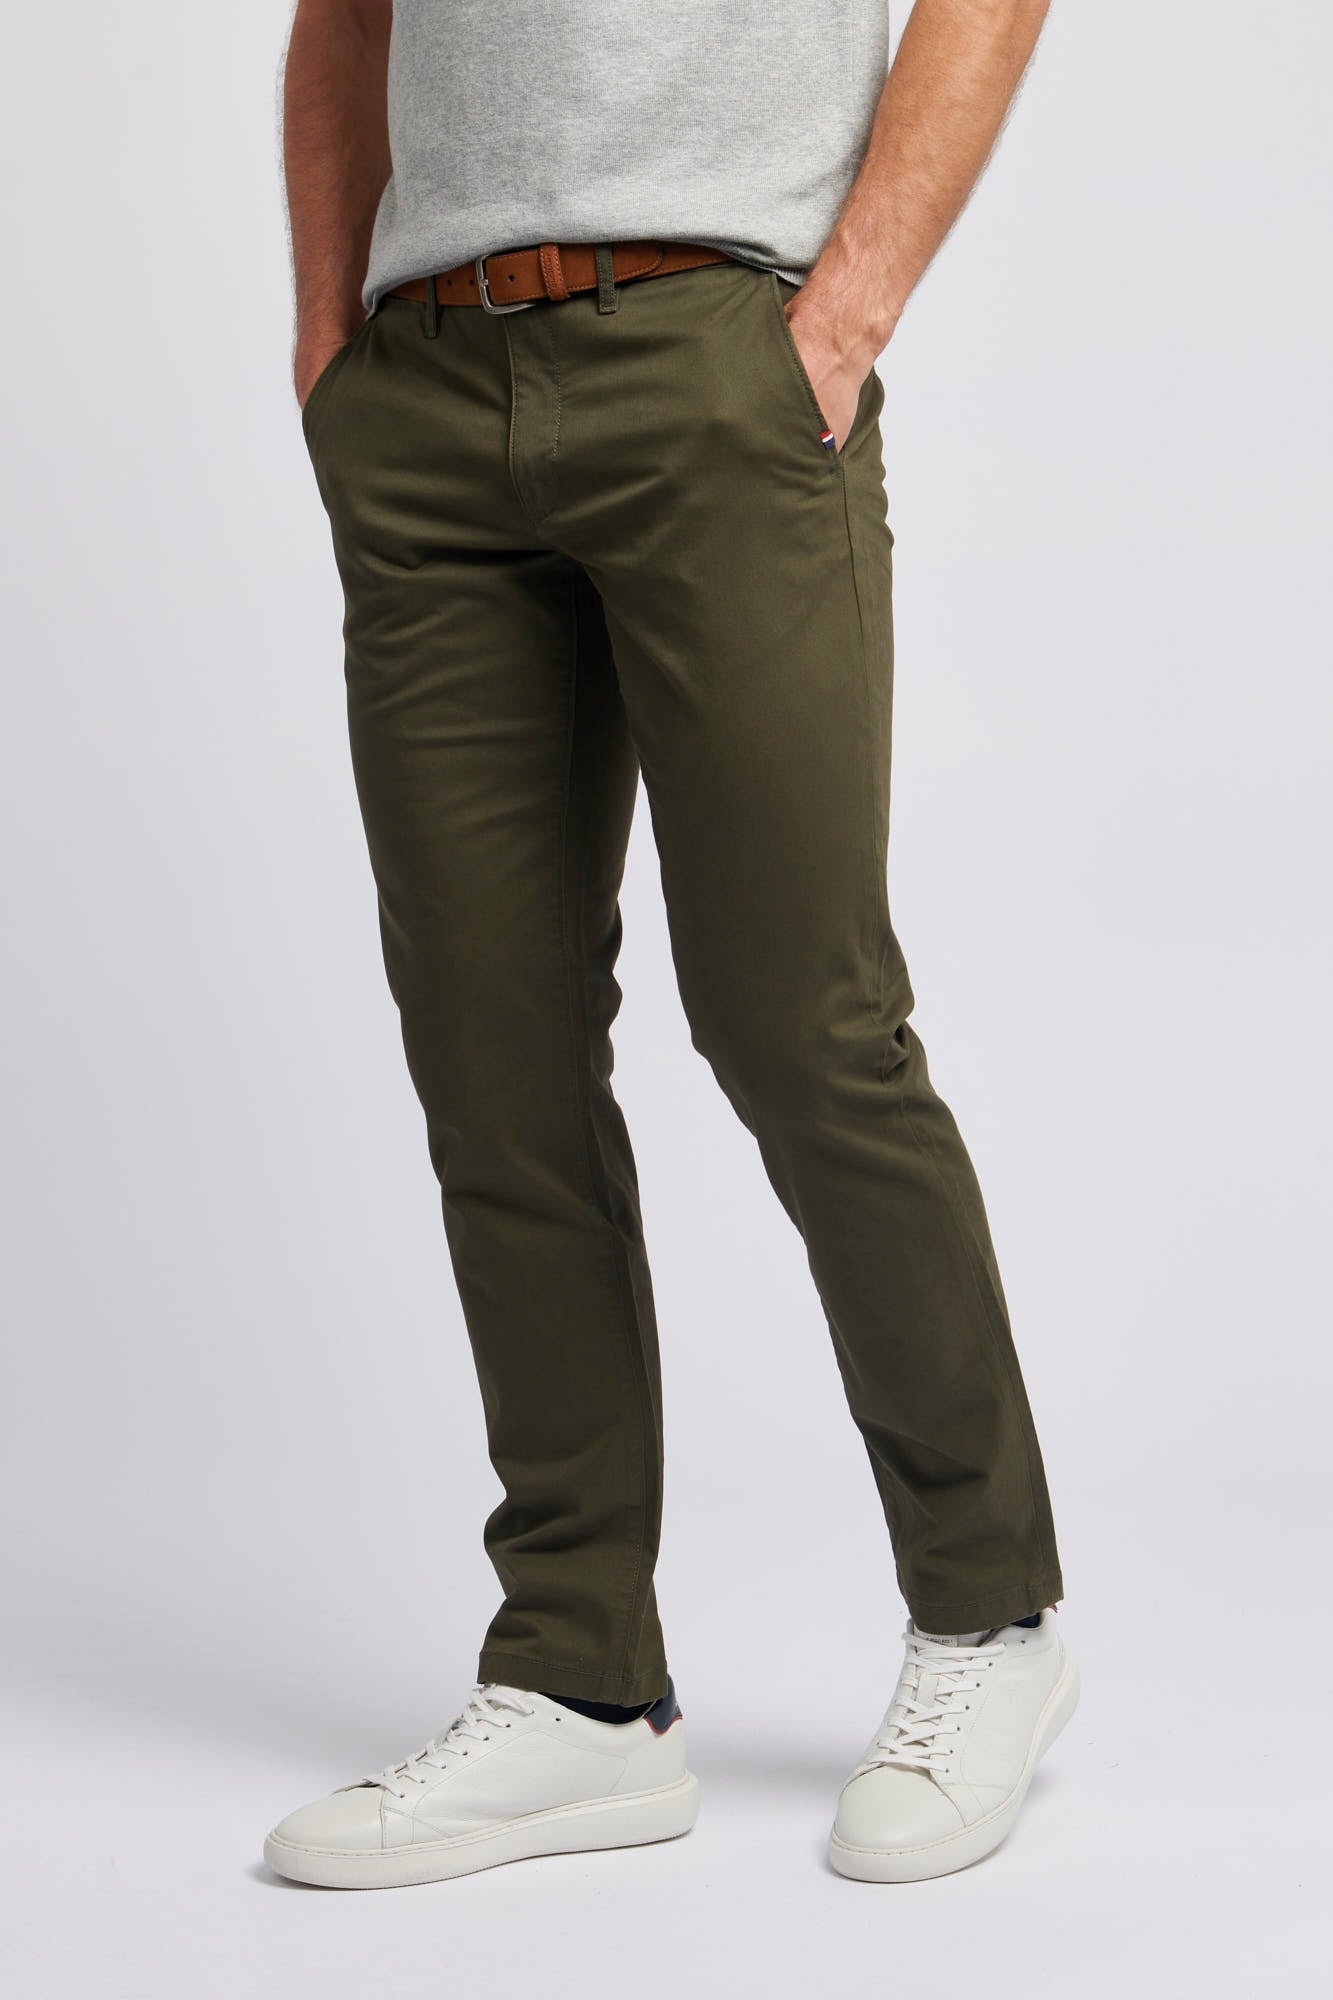 U.S. Polo Assn. Mens Classic Chino in Forest Night